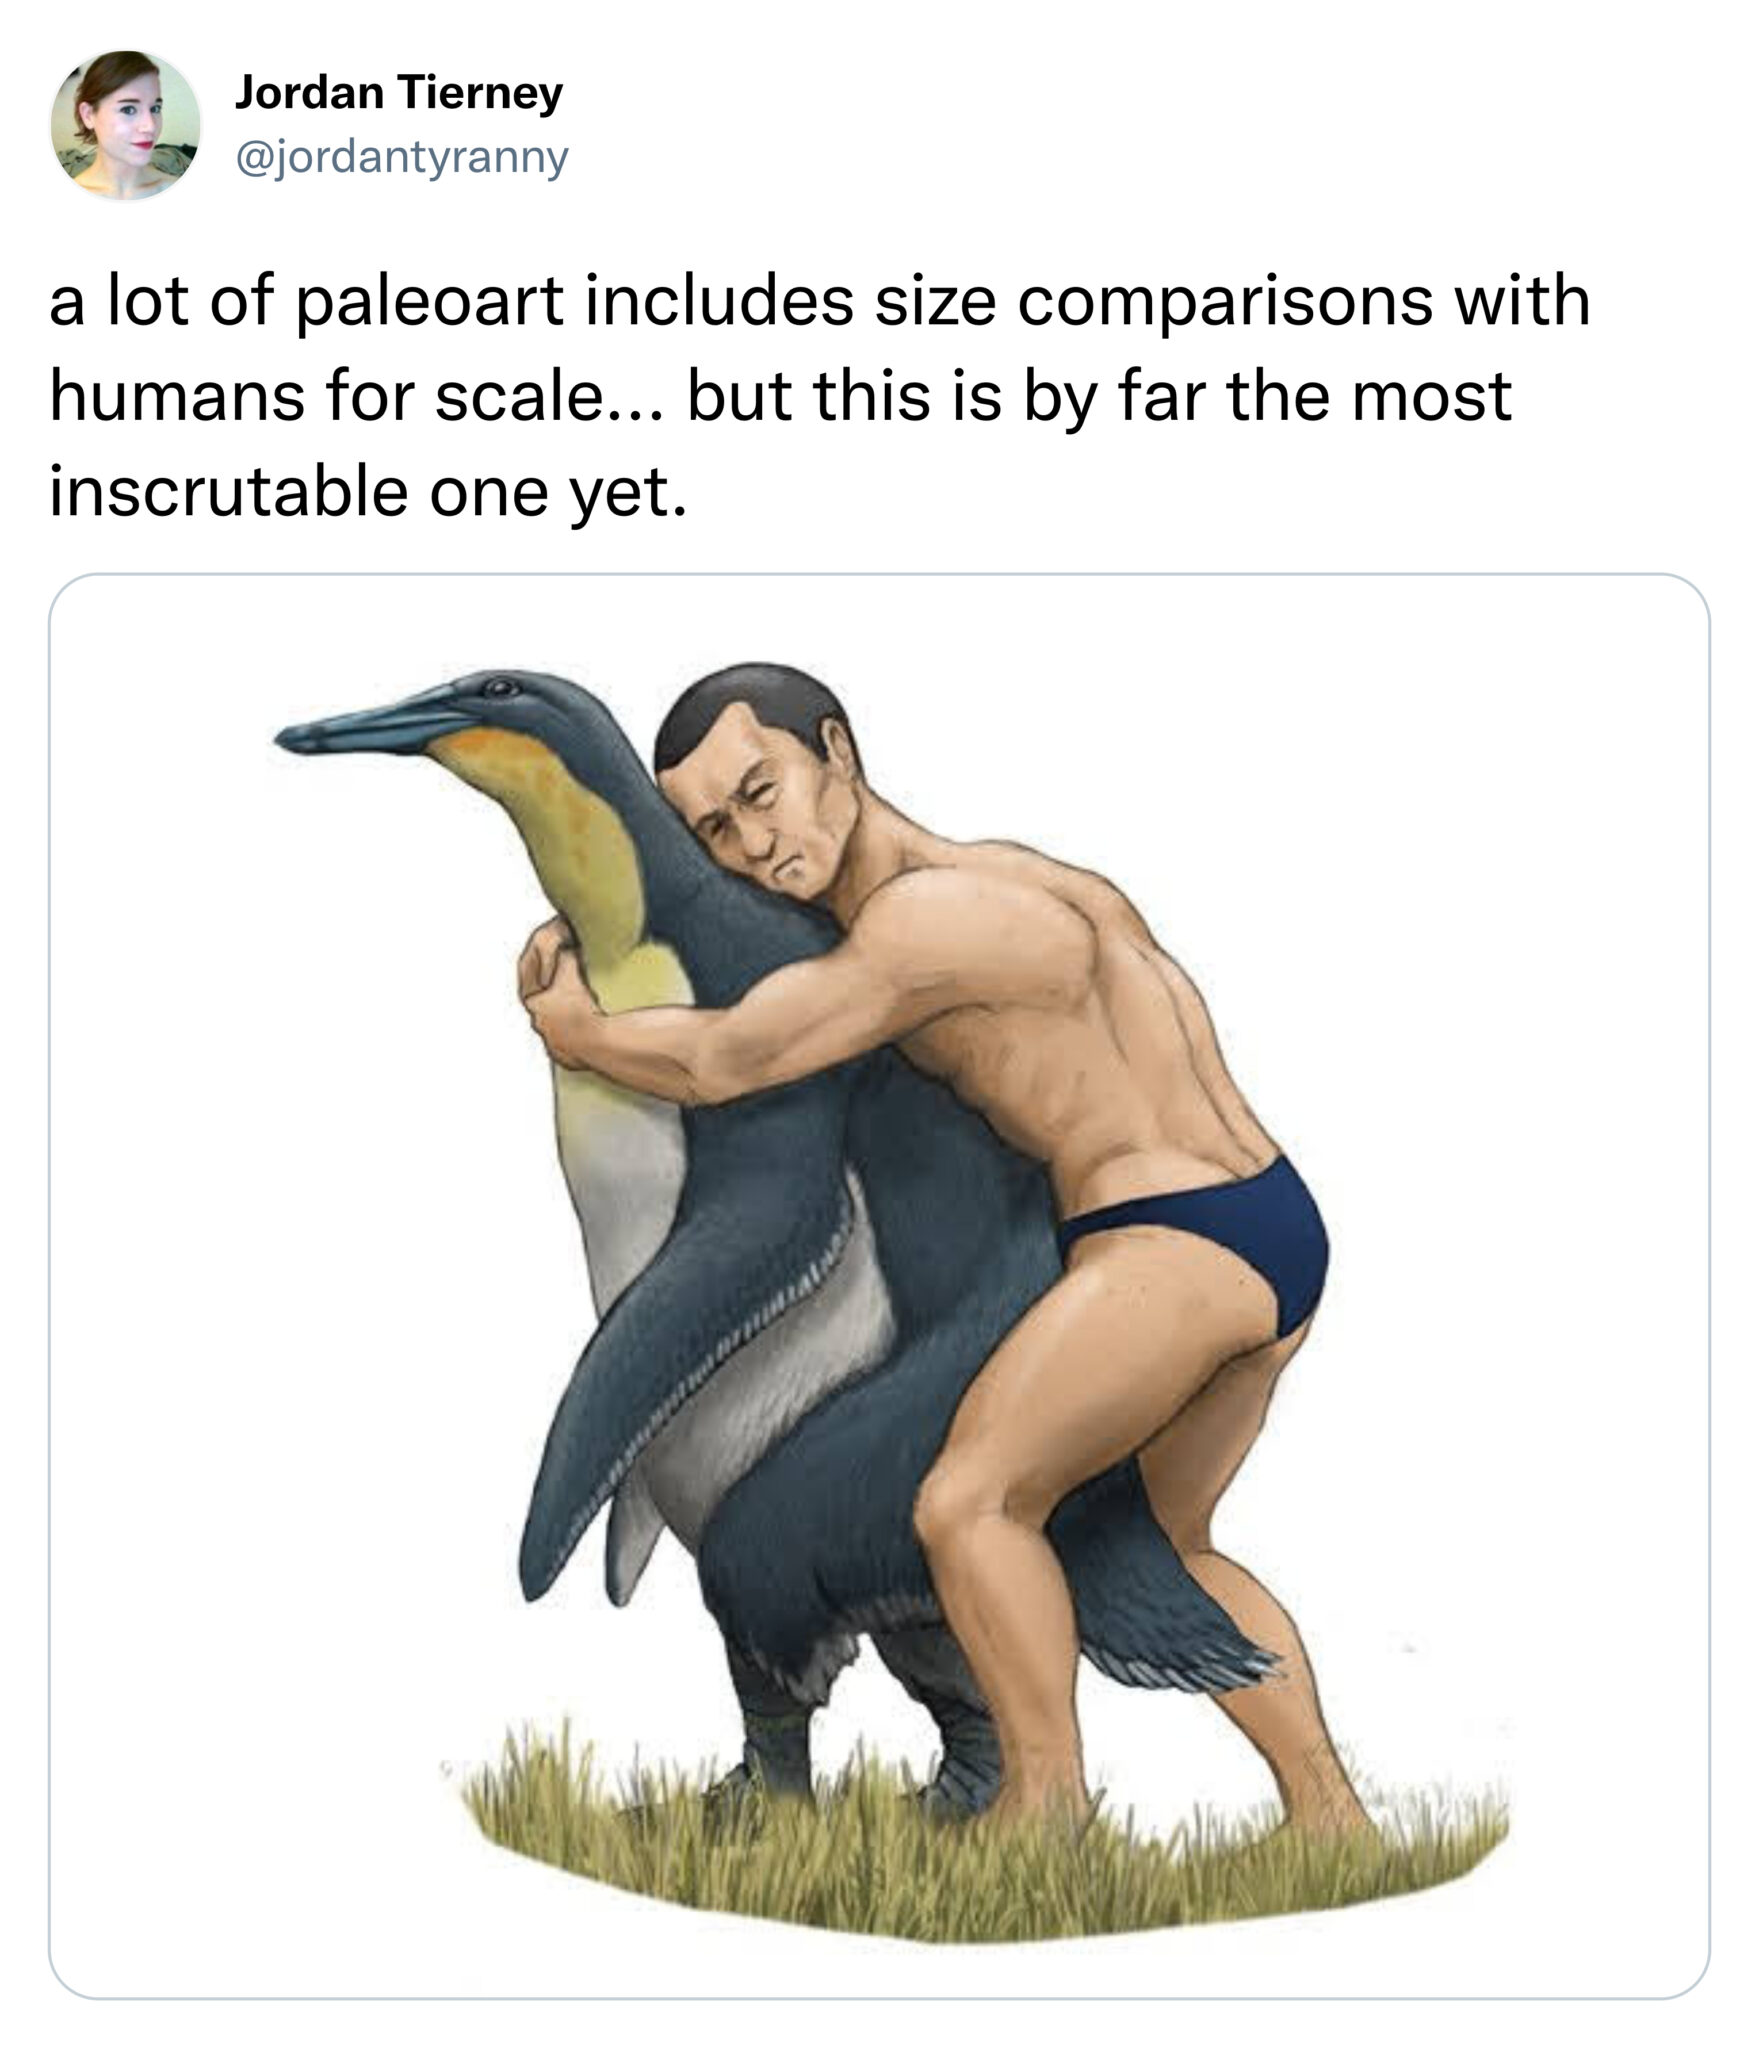 funny tweets - Jordan Tierney a lot of paleoart includes size comparisons with humans for scale... but this is by far the most inscrutable one yet.